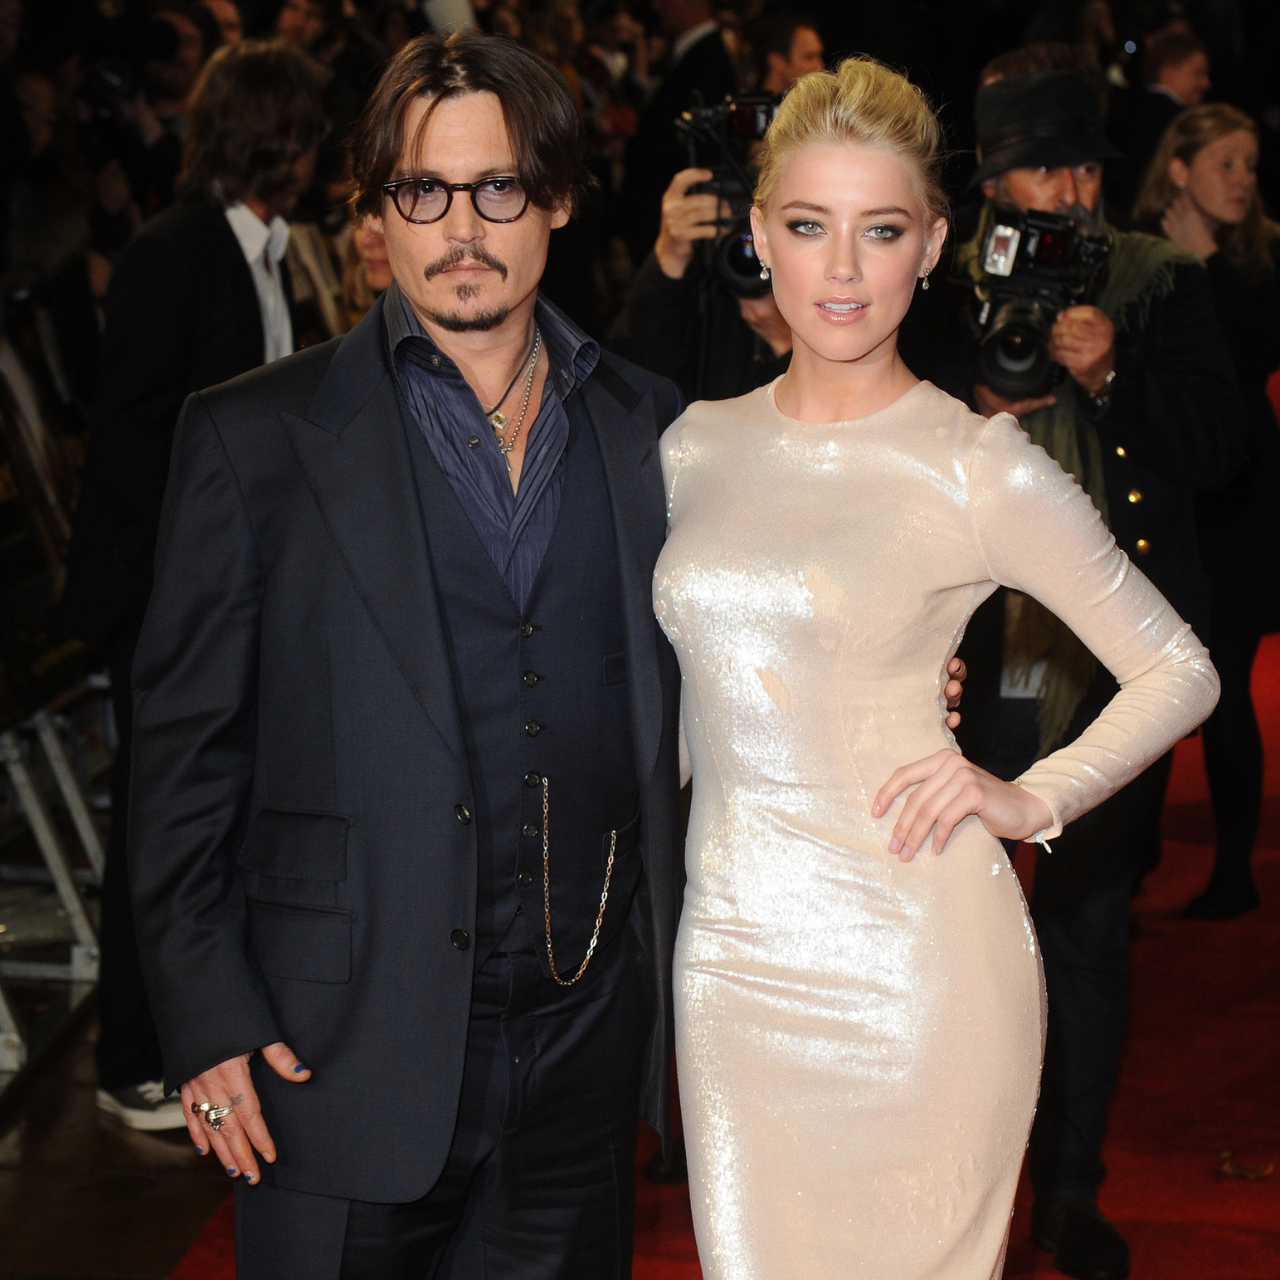 Johnny Depp and Amber Heard attend the 2011 premiere of Rum Diary